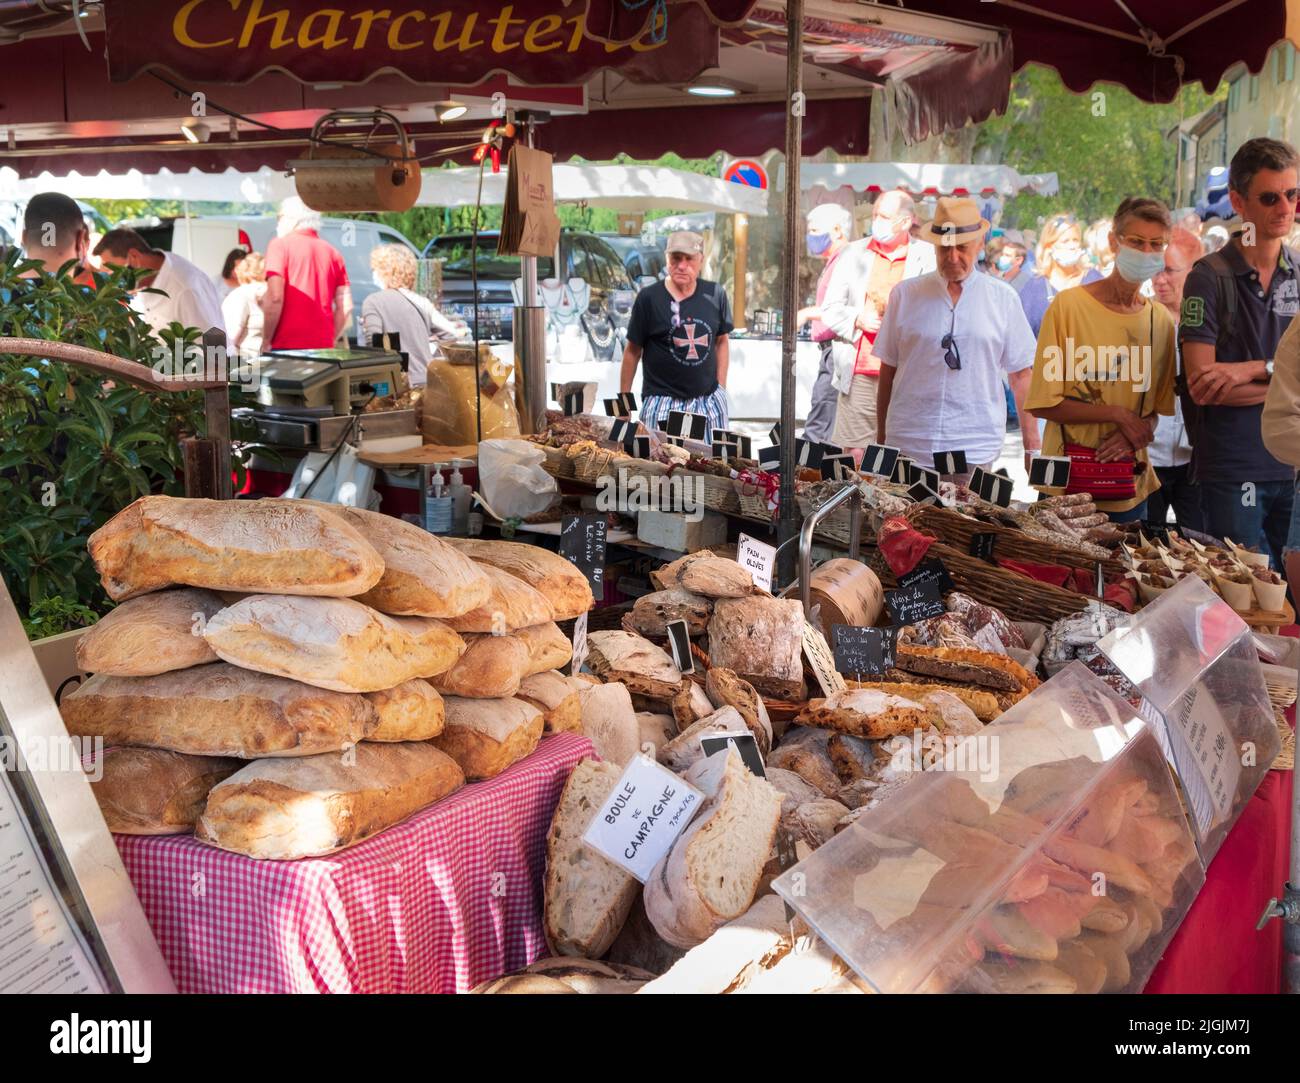 Market Day with stalls and food, Lourmarin, Provence, France Stock Photo